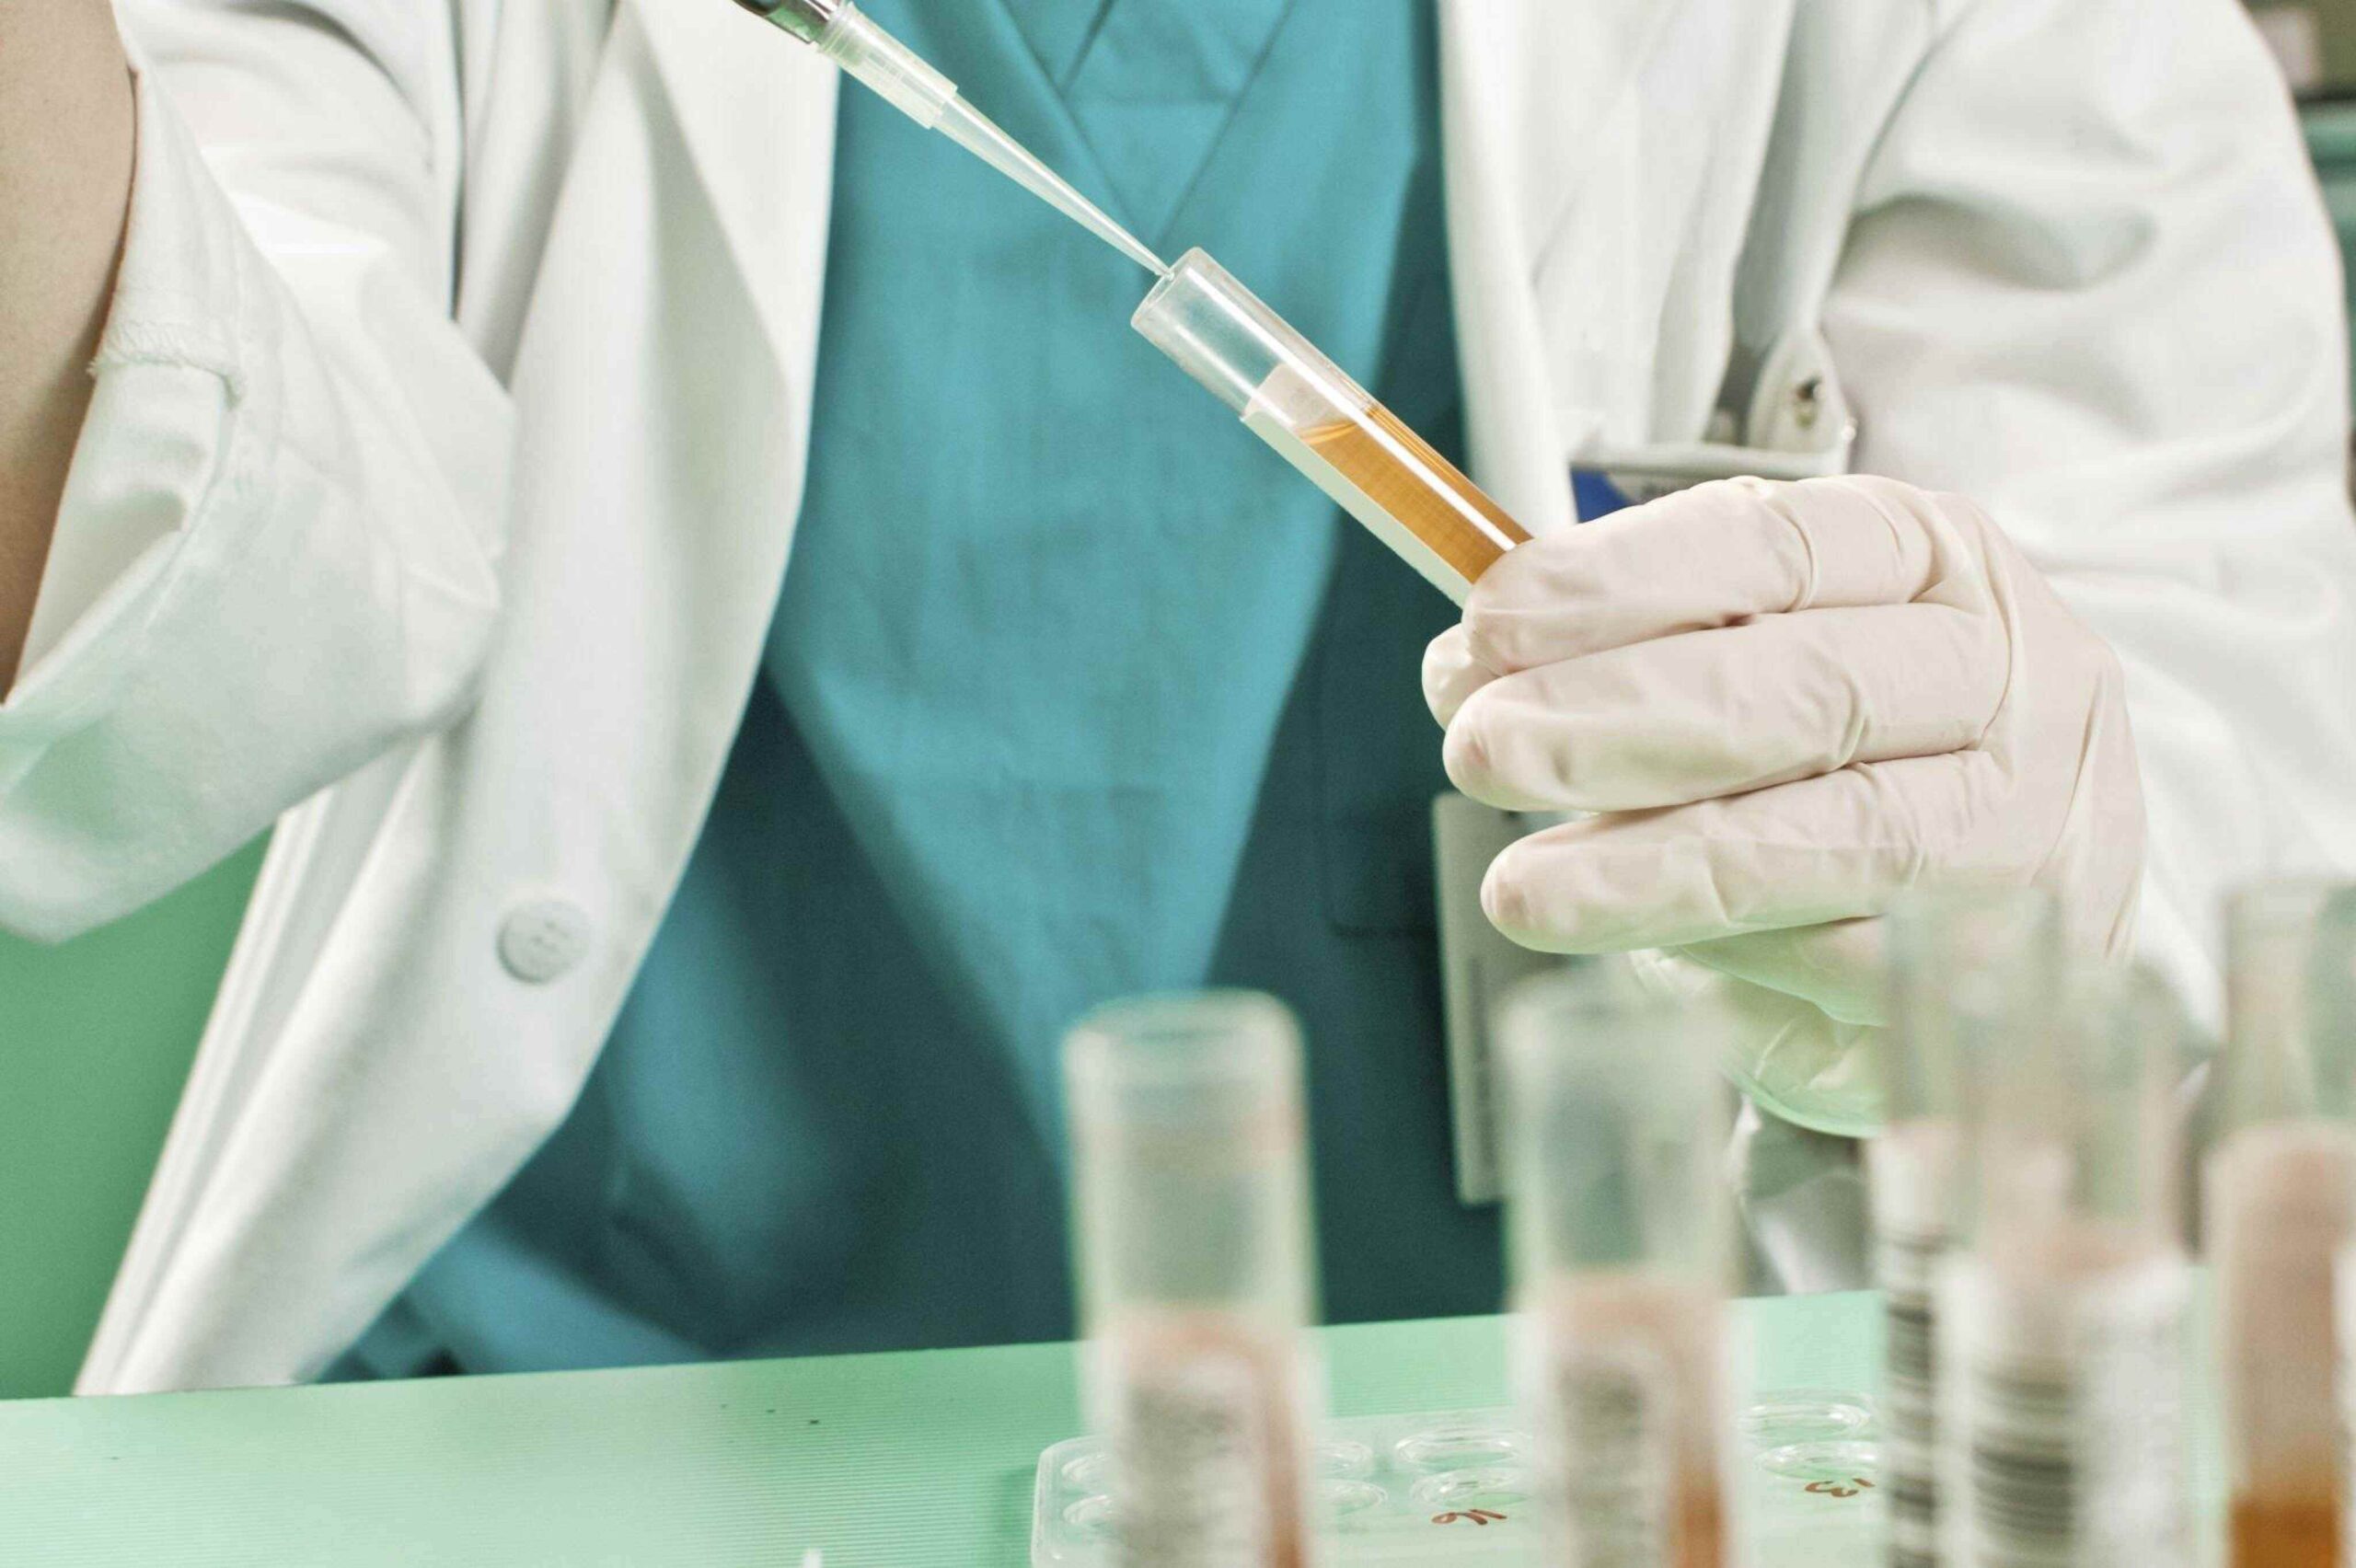 The Science Behind Drug Test Kits: How Do They Detect Substances?